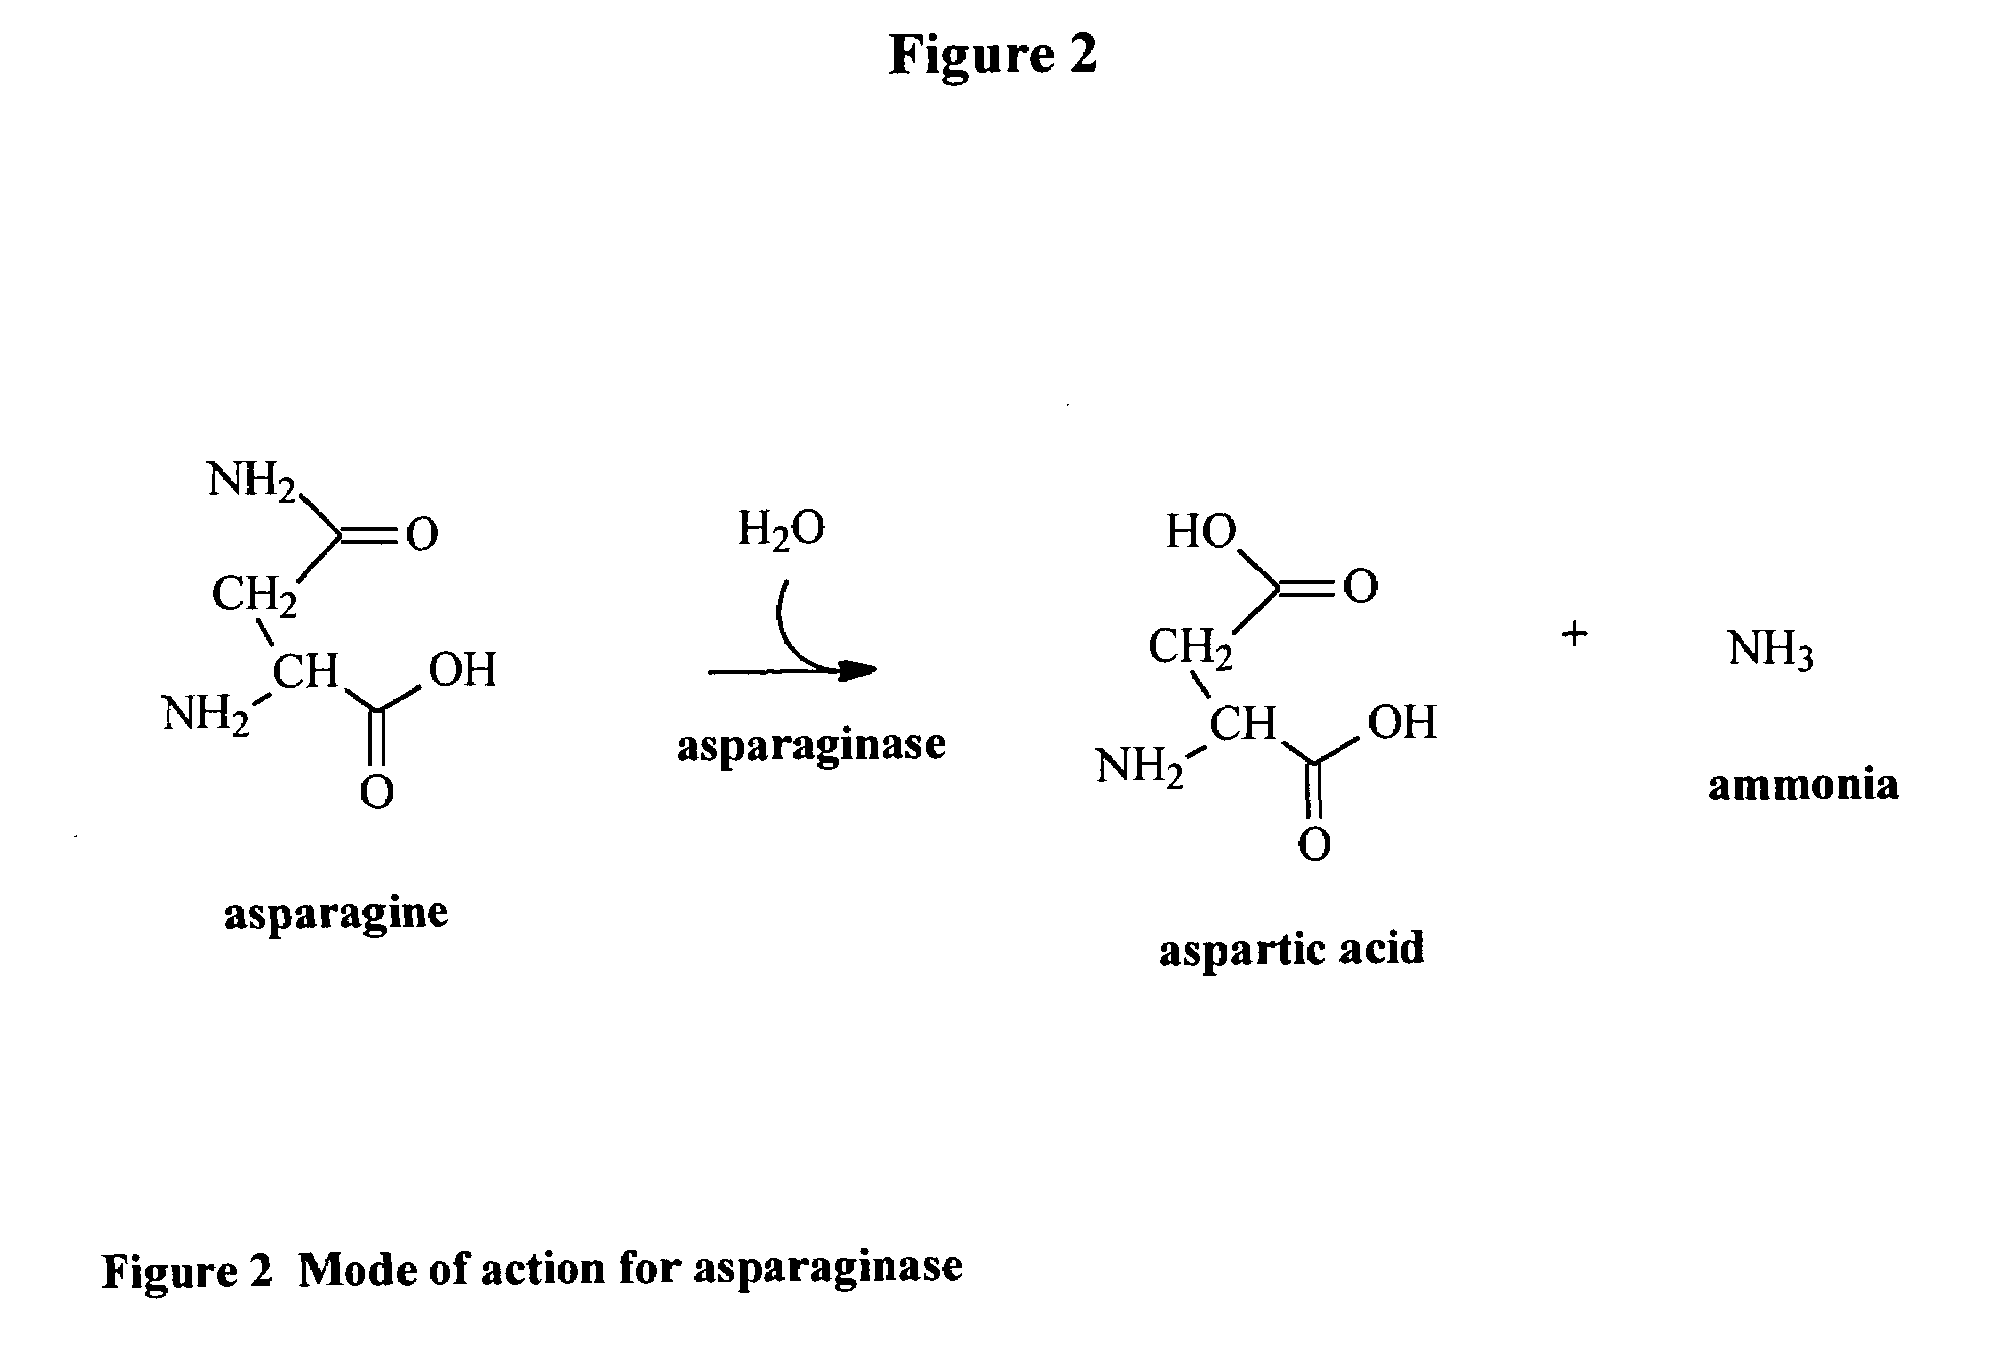 Method for reduction of acrylamide in roasted coffee beans, roasted coffee beans having reduced levels of acrylamide, and article of commerce